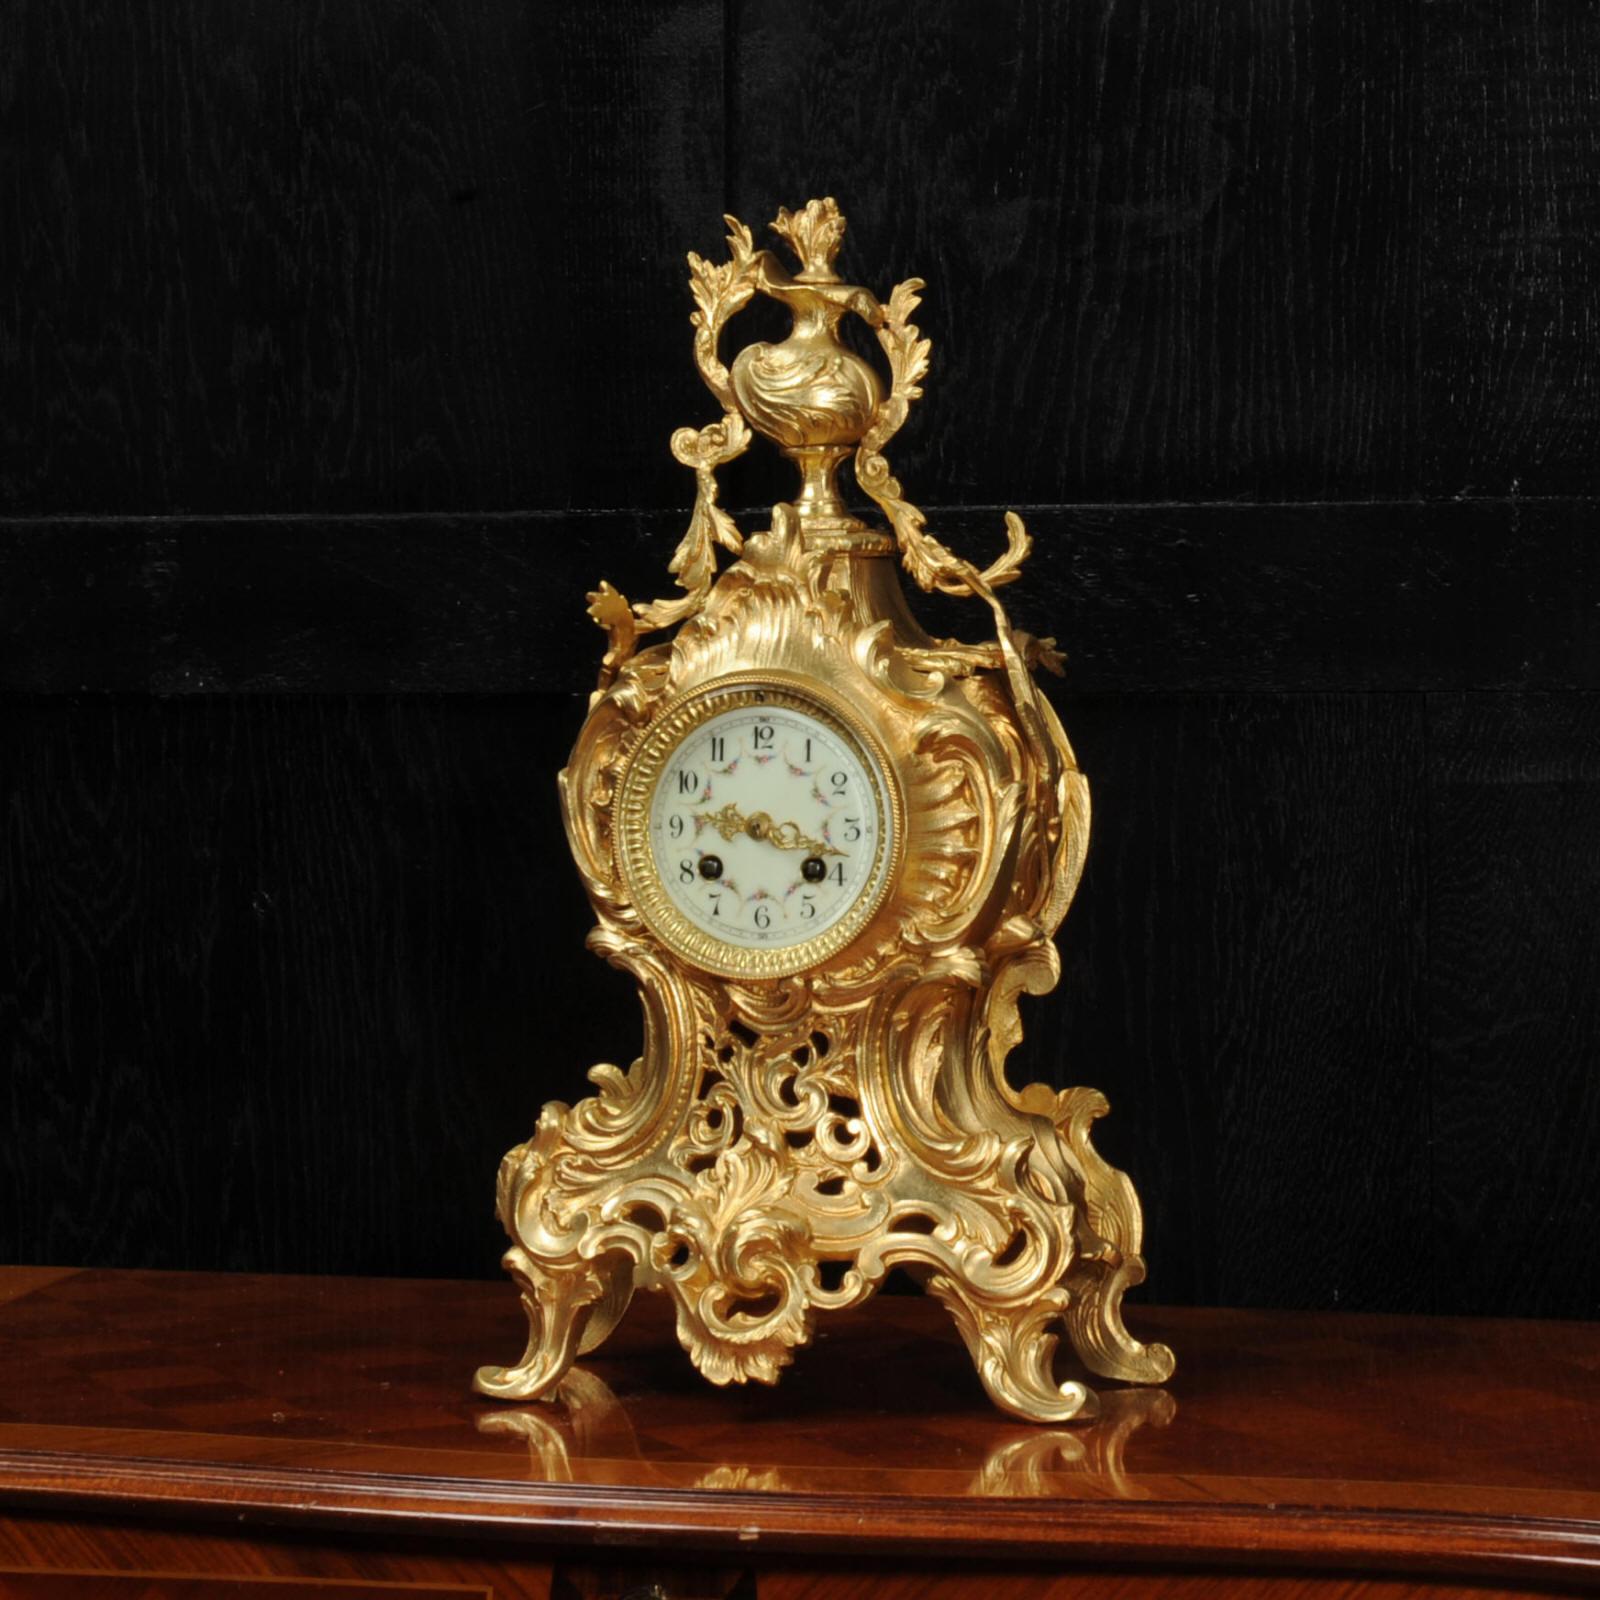 A stunning original antique French Rococo clock, dating from around 1880. It is beautifully modelled in gilded bronze, of waisted shape, profusely decorated with 'C' scrolls, acanthus leaves and trailing foliage. To the top is an elaborate urn with